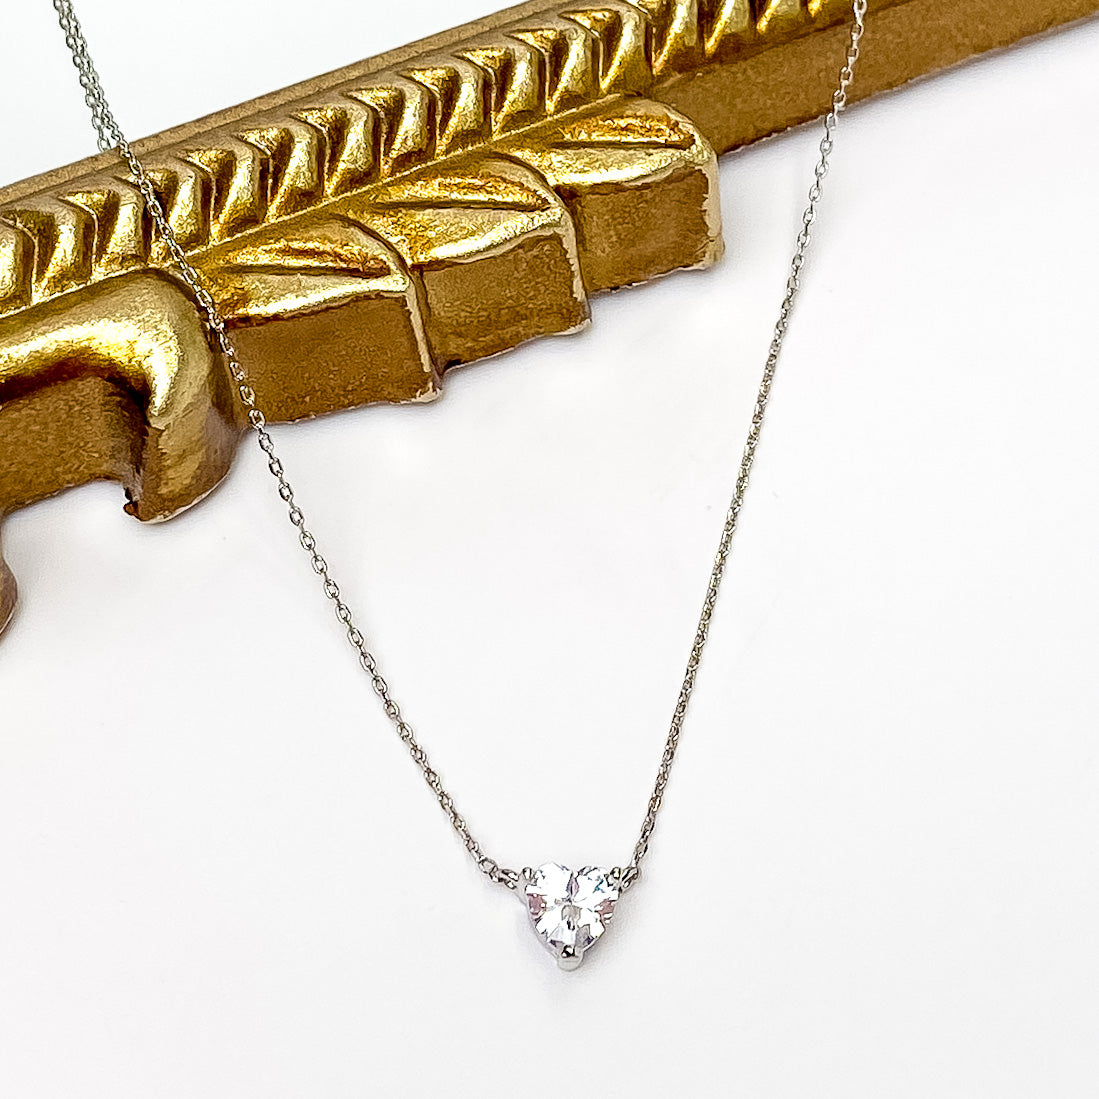 Silver chain necklace with a clear crystal heart pendant. This necklace is pictured partially laying on a gold mirror on a white background. 